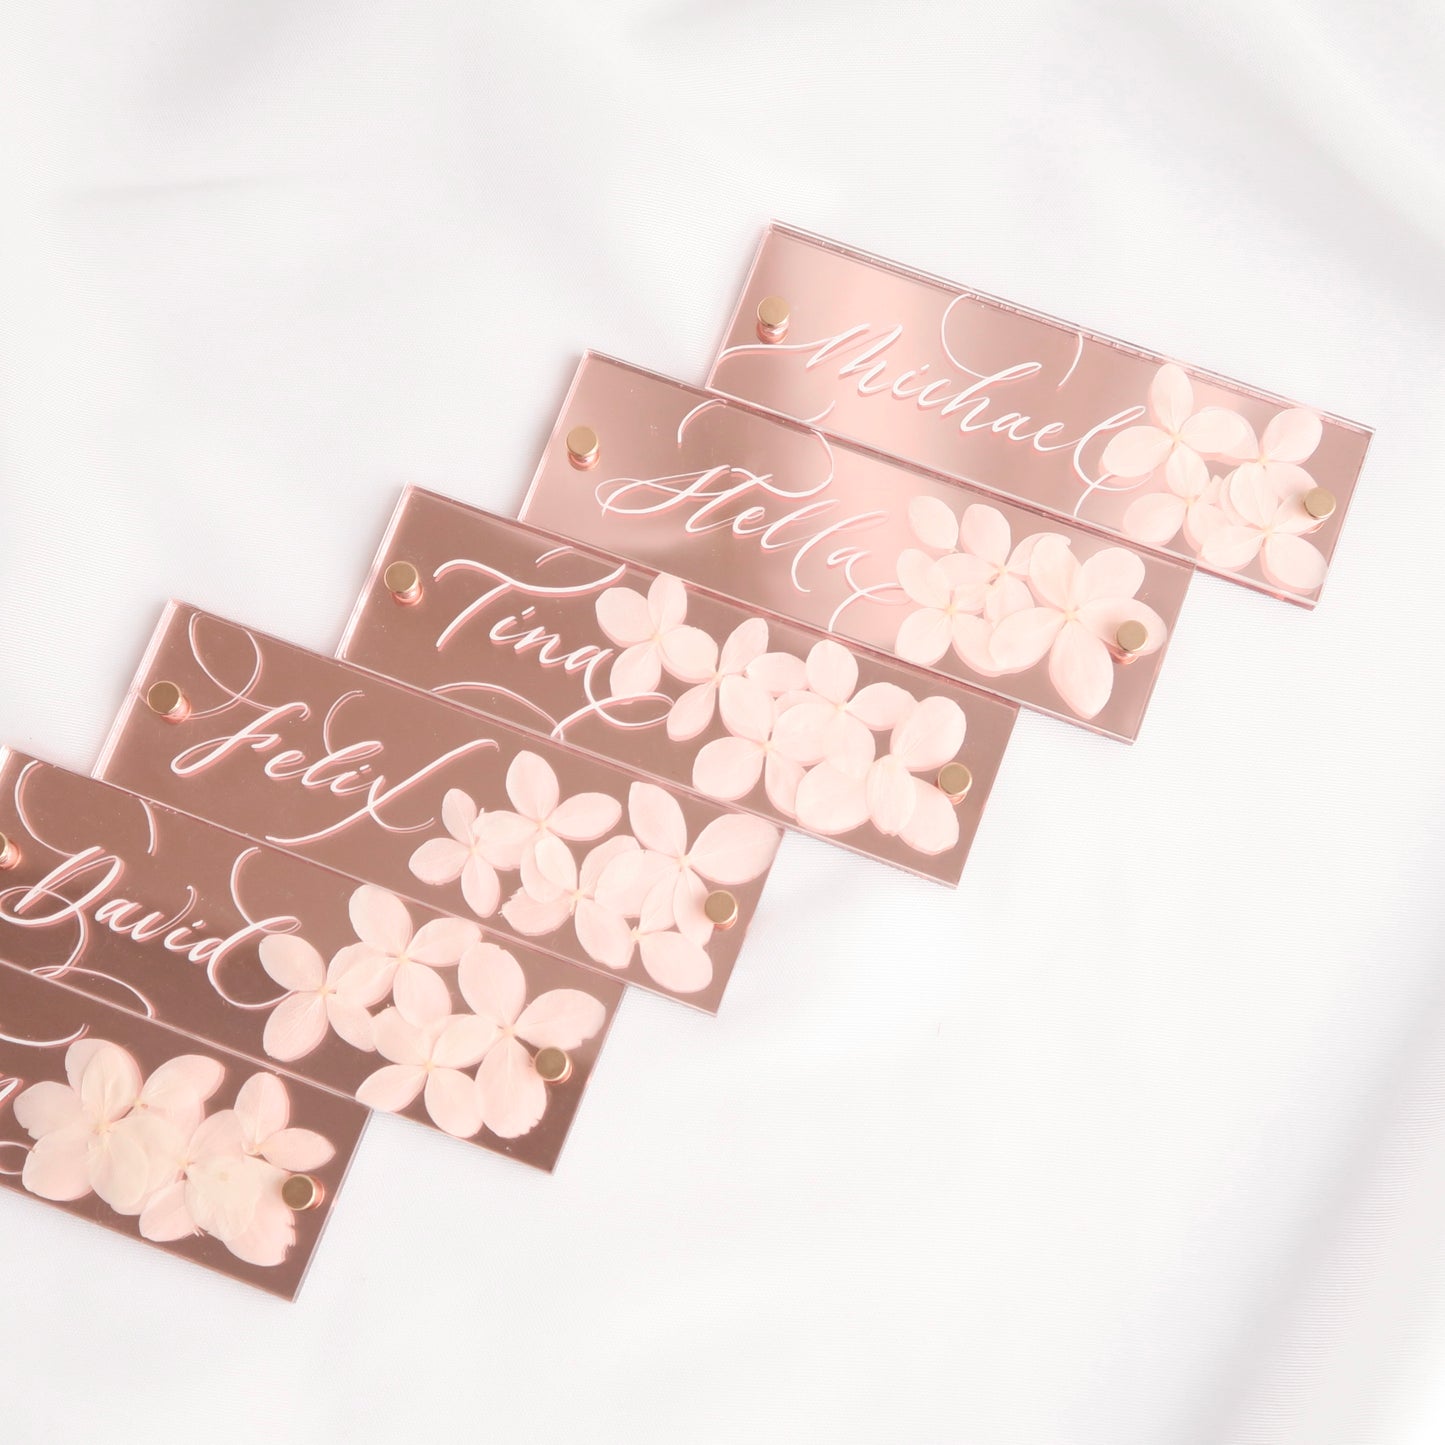 Full Bloom Place Cards